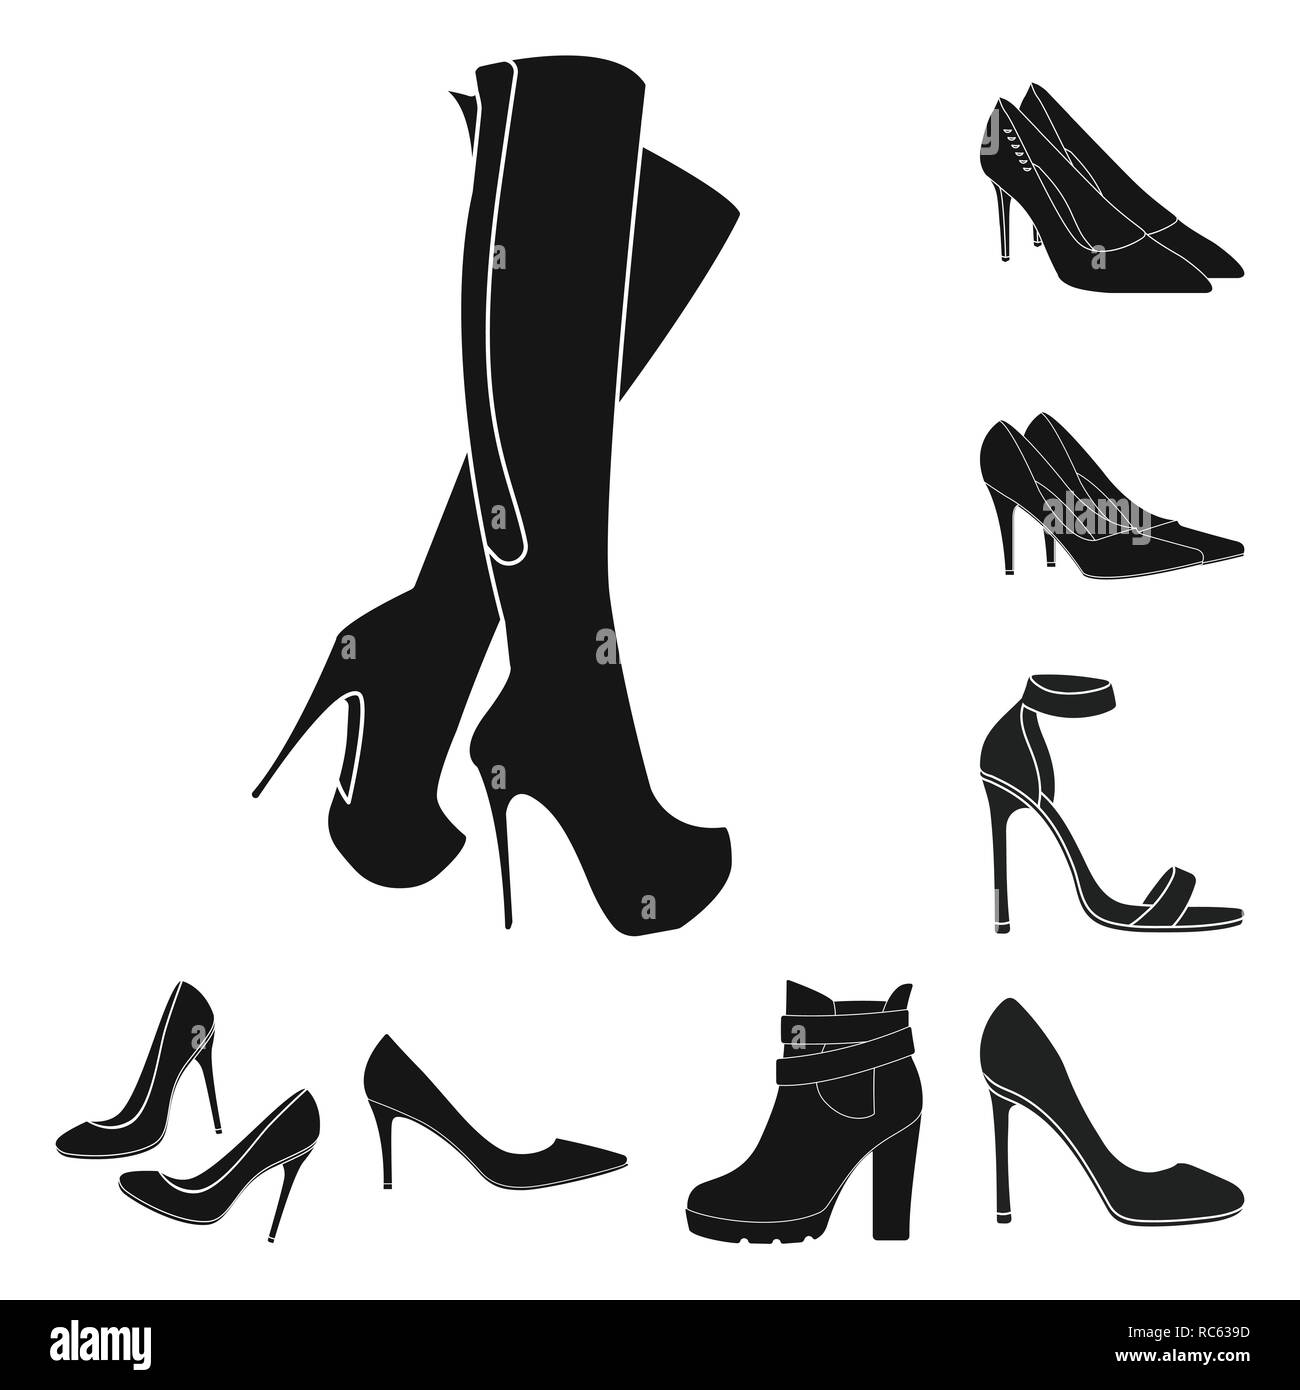 sticker,women,red,silhouette,boot,heel,high,shoes,stiletto,fashion,shoe,pair,girl,set,vector,icon,illustration,isolated,collection,design,element,graphic,sign,black,simple, Vector Vectors Stock Image Art - Alamy